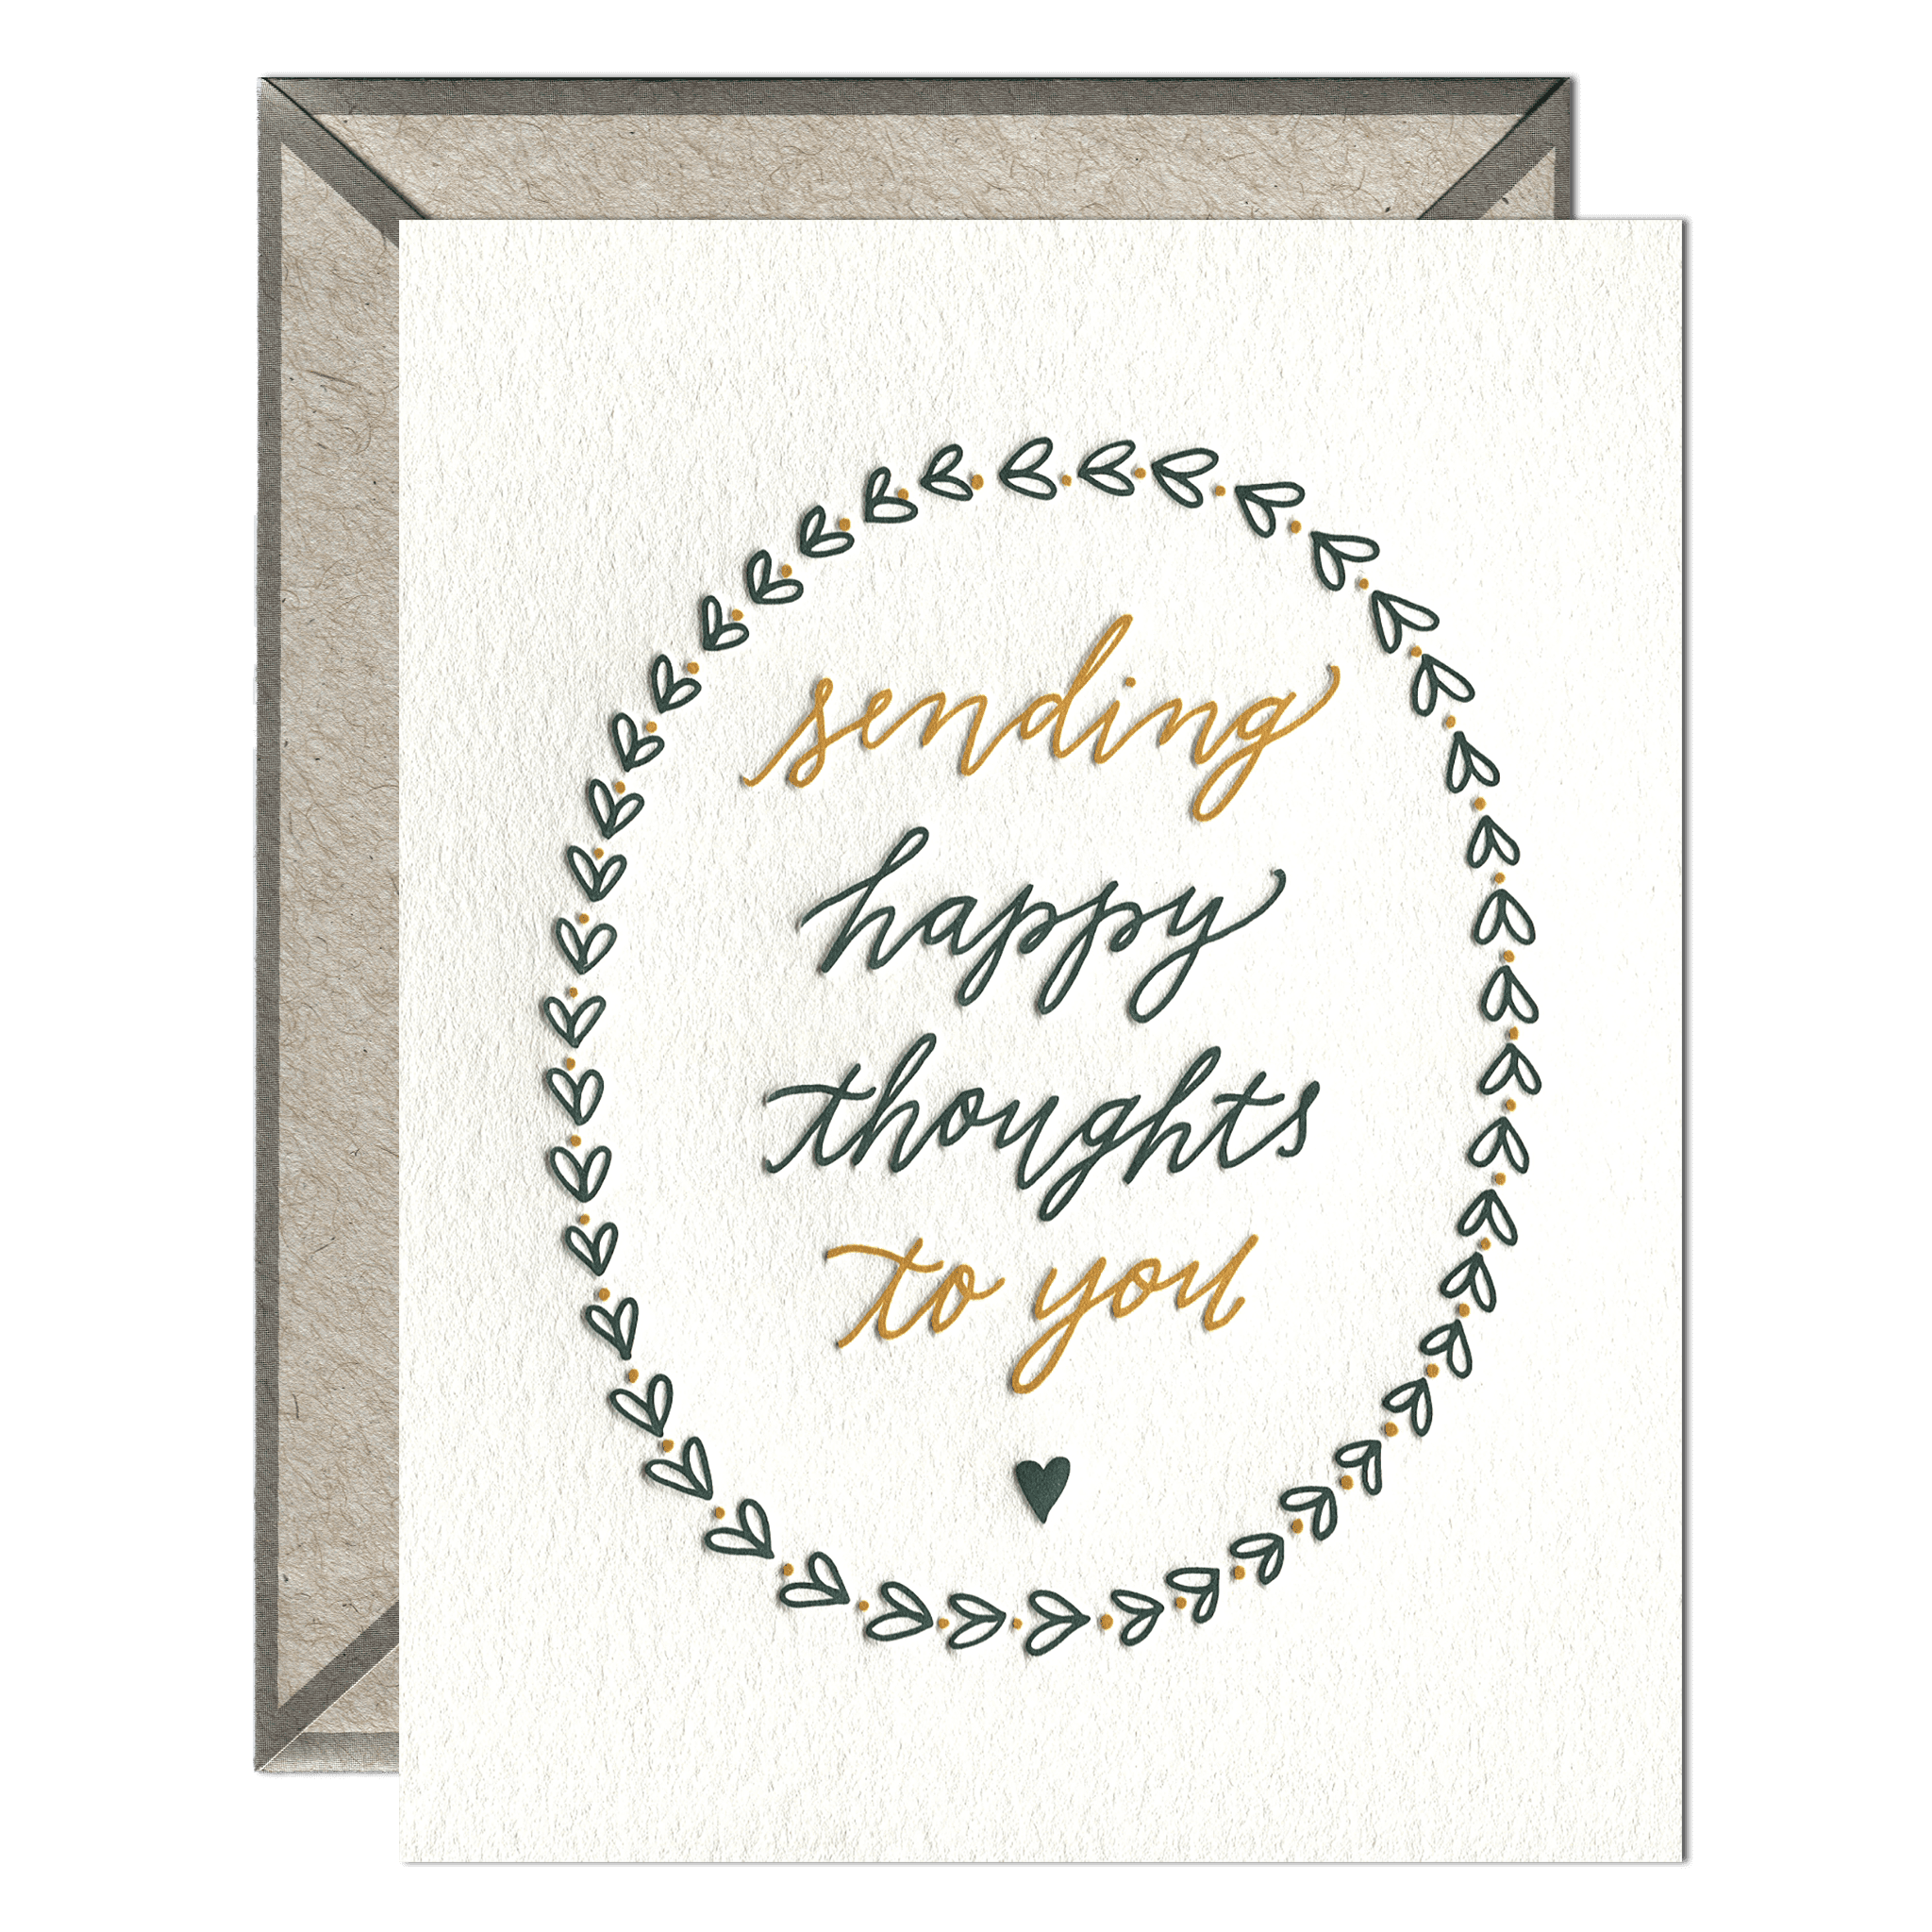 Happy Thoughts - Encouragement
